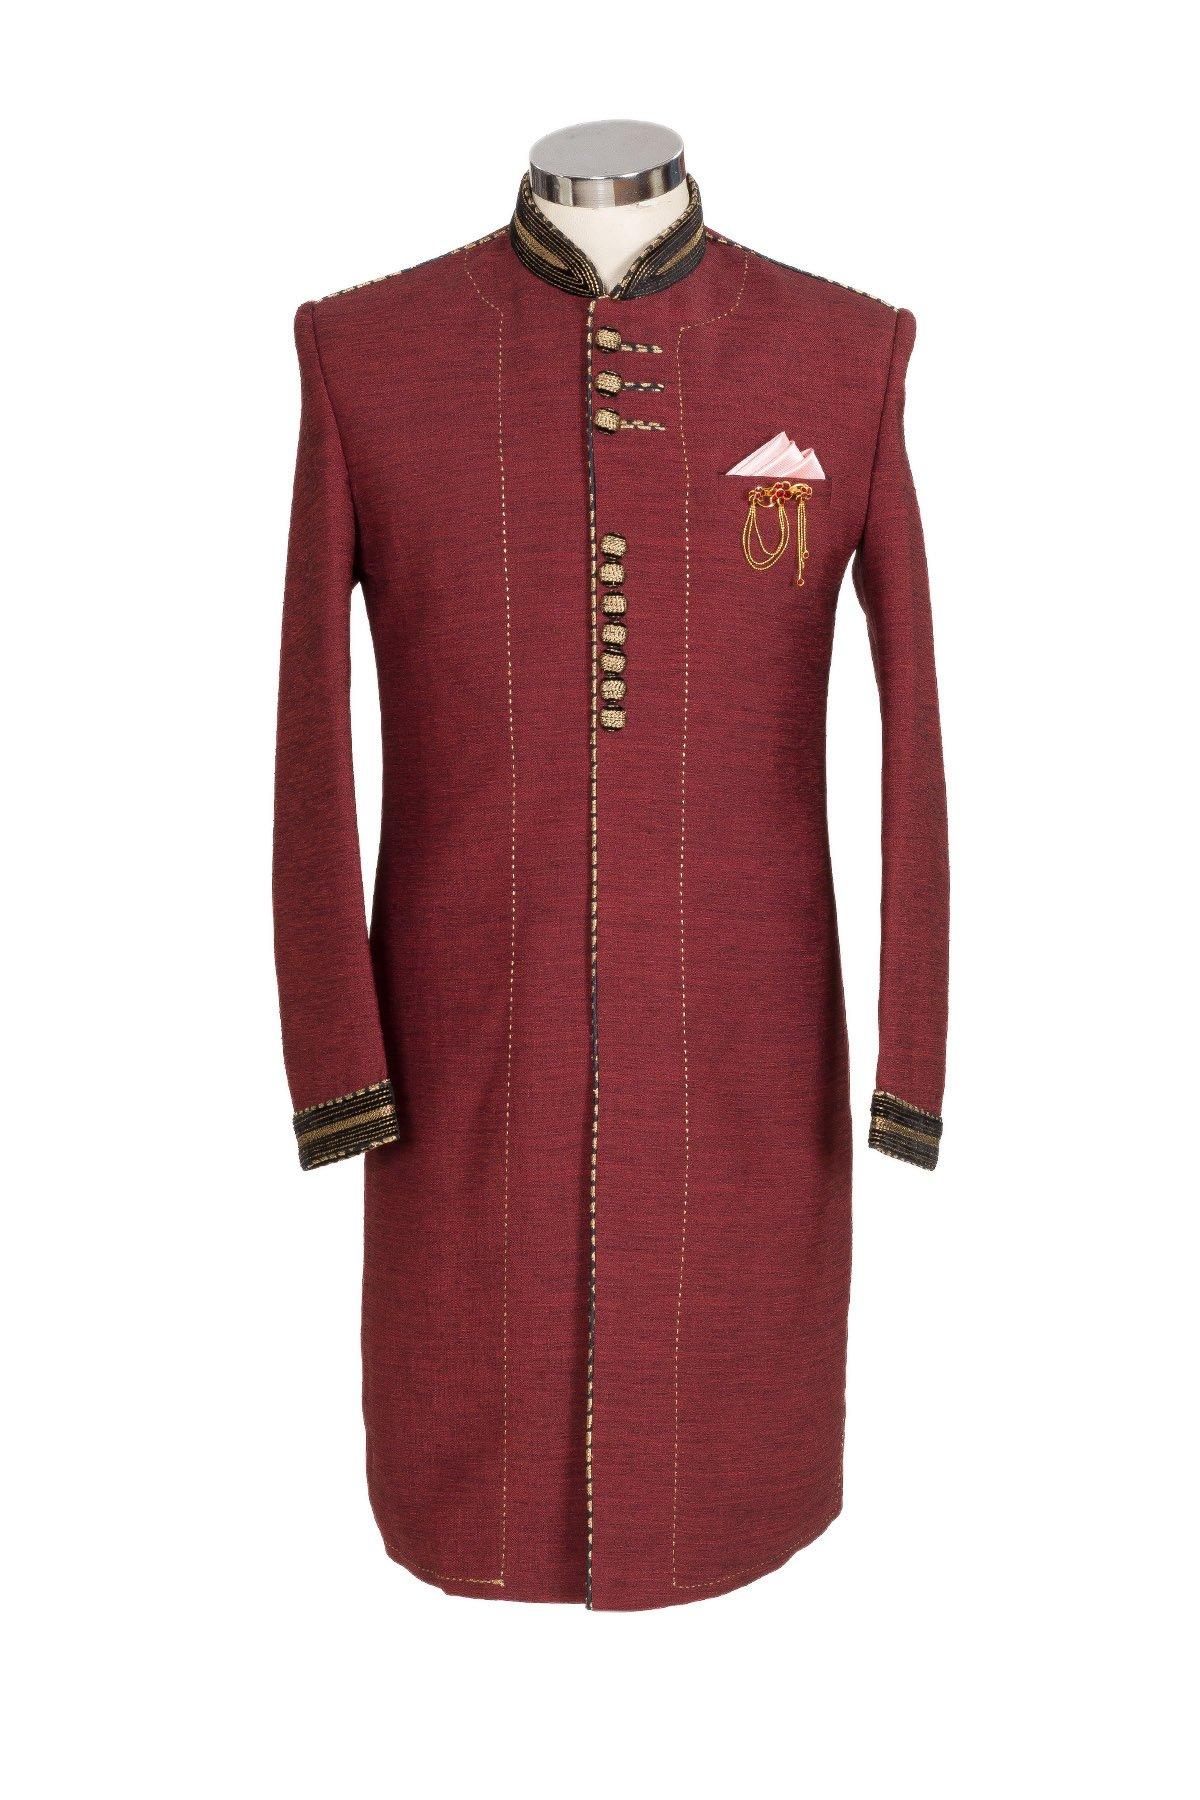 Wine-Maroon Colored Textured Finish Ethnic Wear